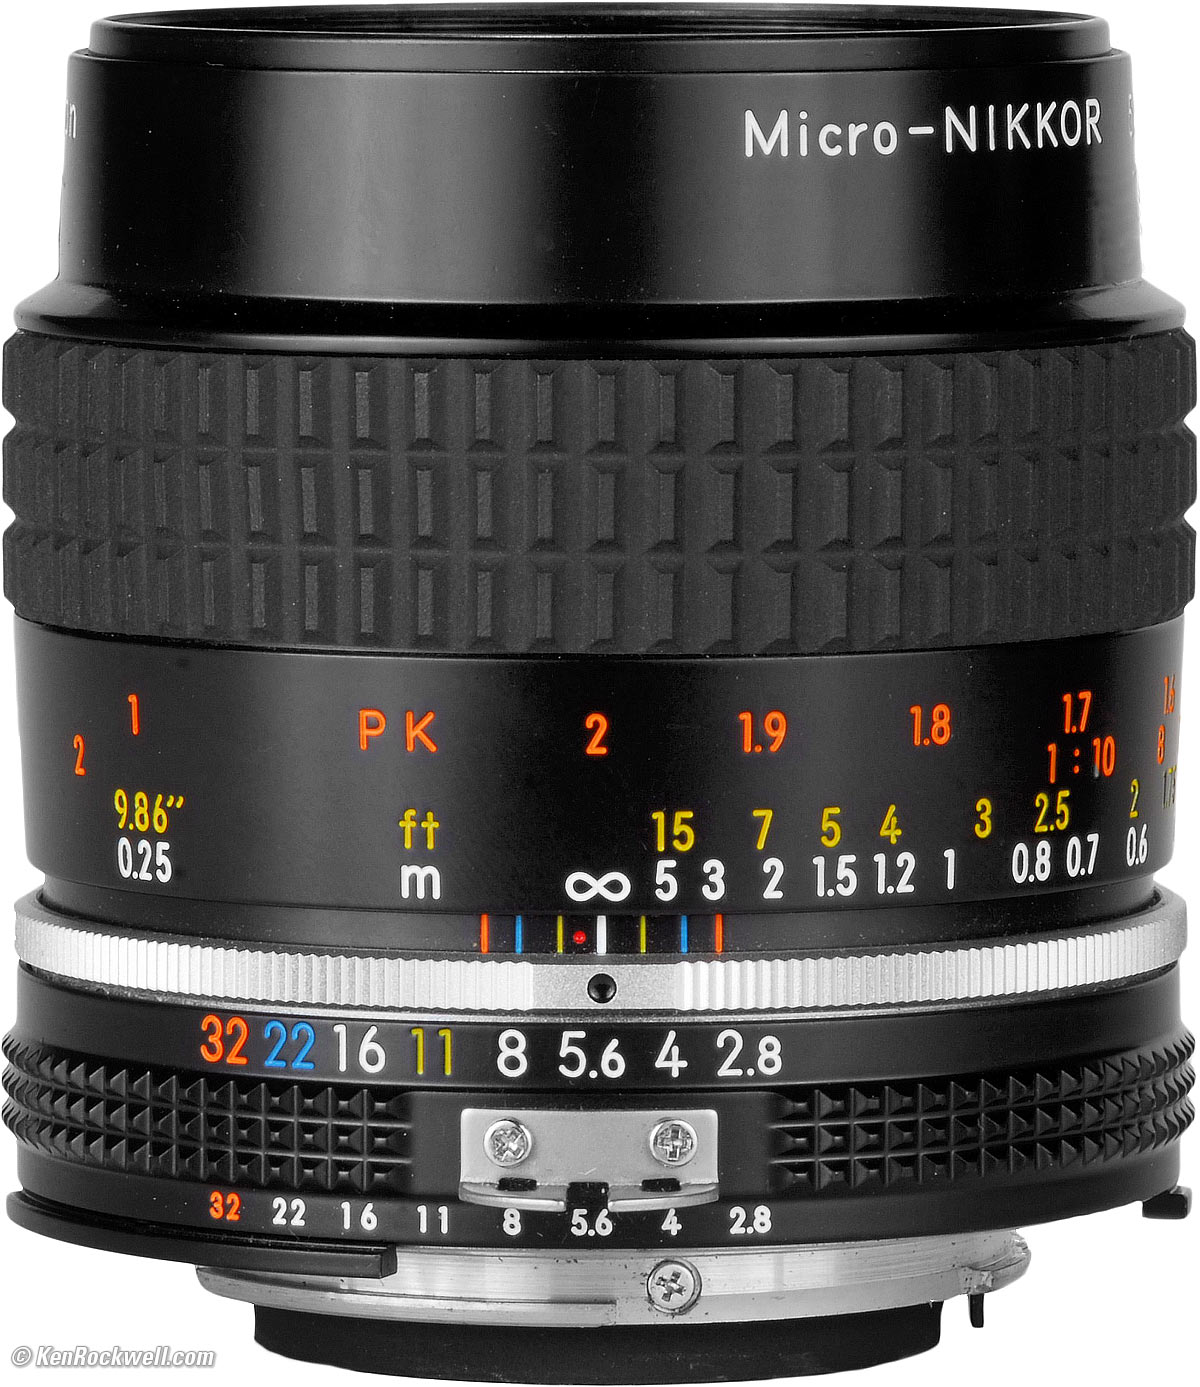 Ai-s Micro-Nikkor 55mm f2.8